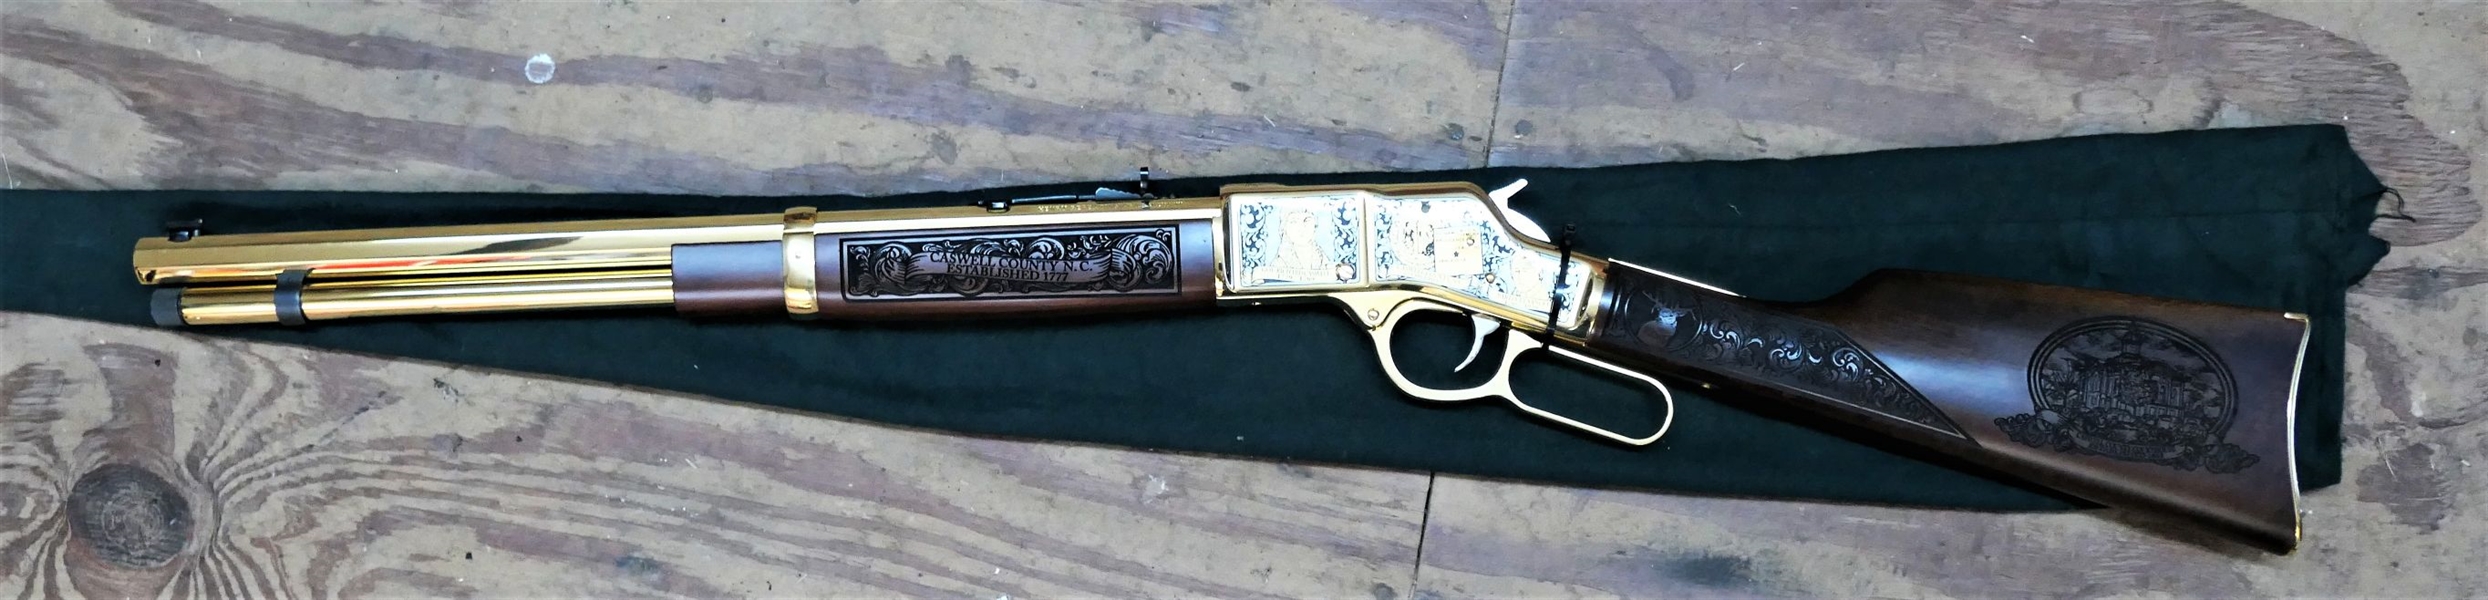 Henry Repeating Arms Co. .44 REM Magnum / .44 SPL - Caswell County North Carolina -Dated 2007 - One of Ten Produced - Engraved with Caswell County Scenes and Important Figures - Thomas Day, Town...